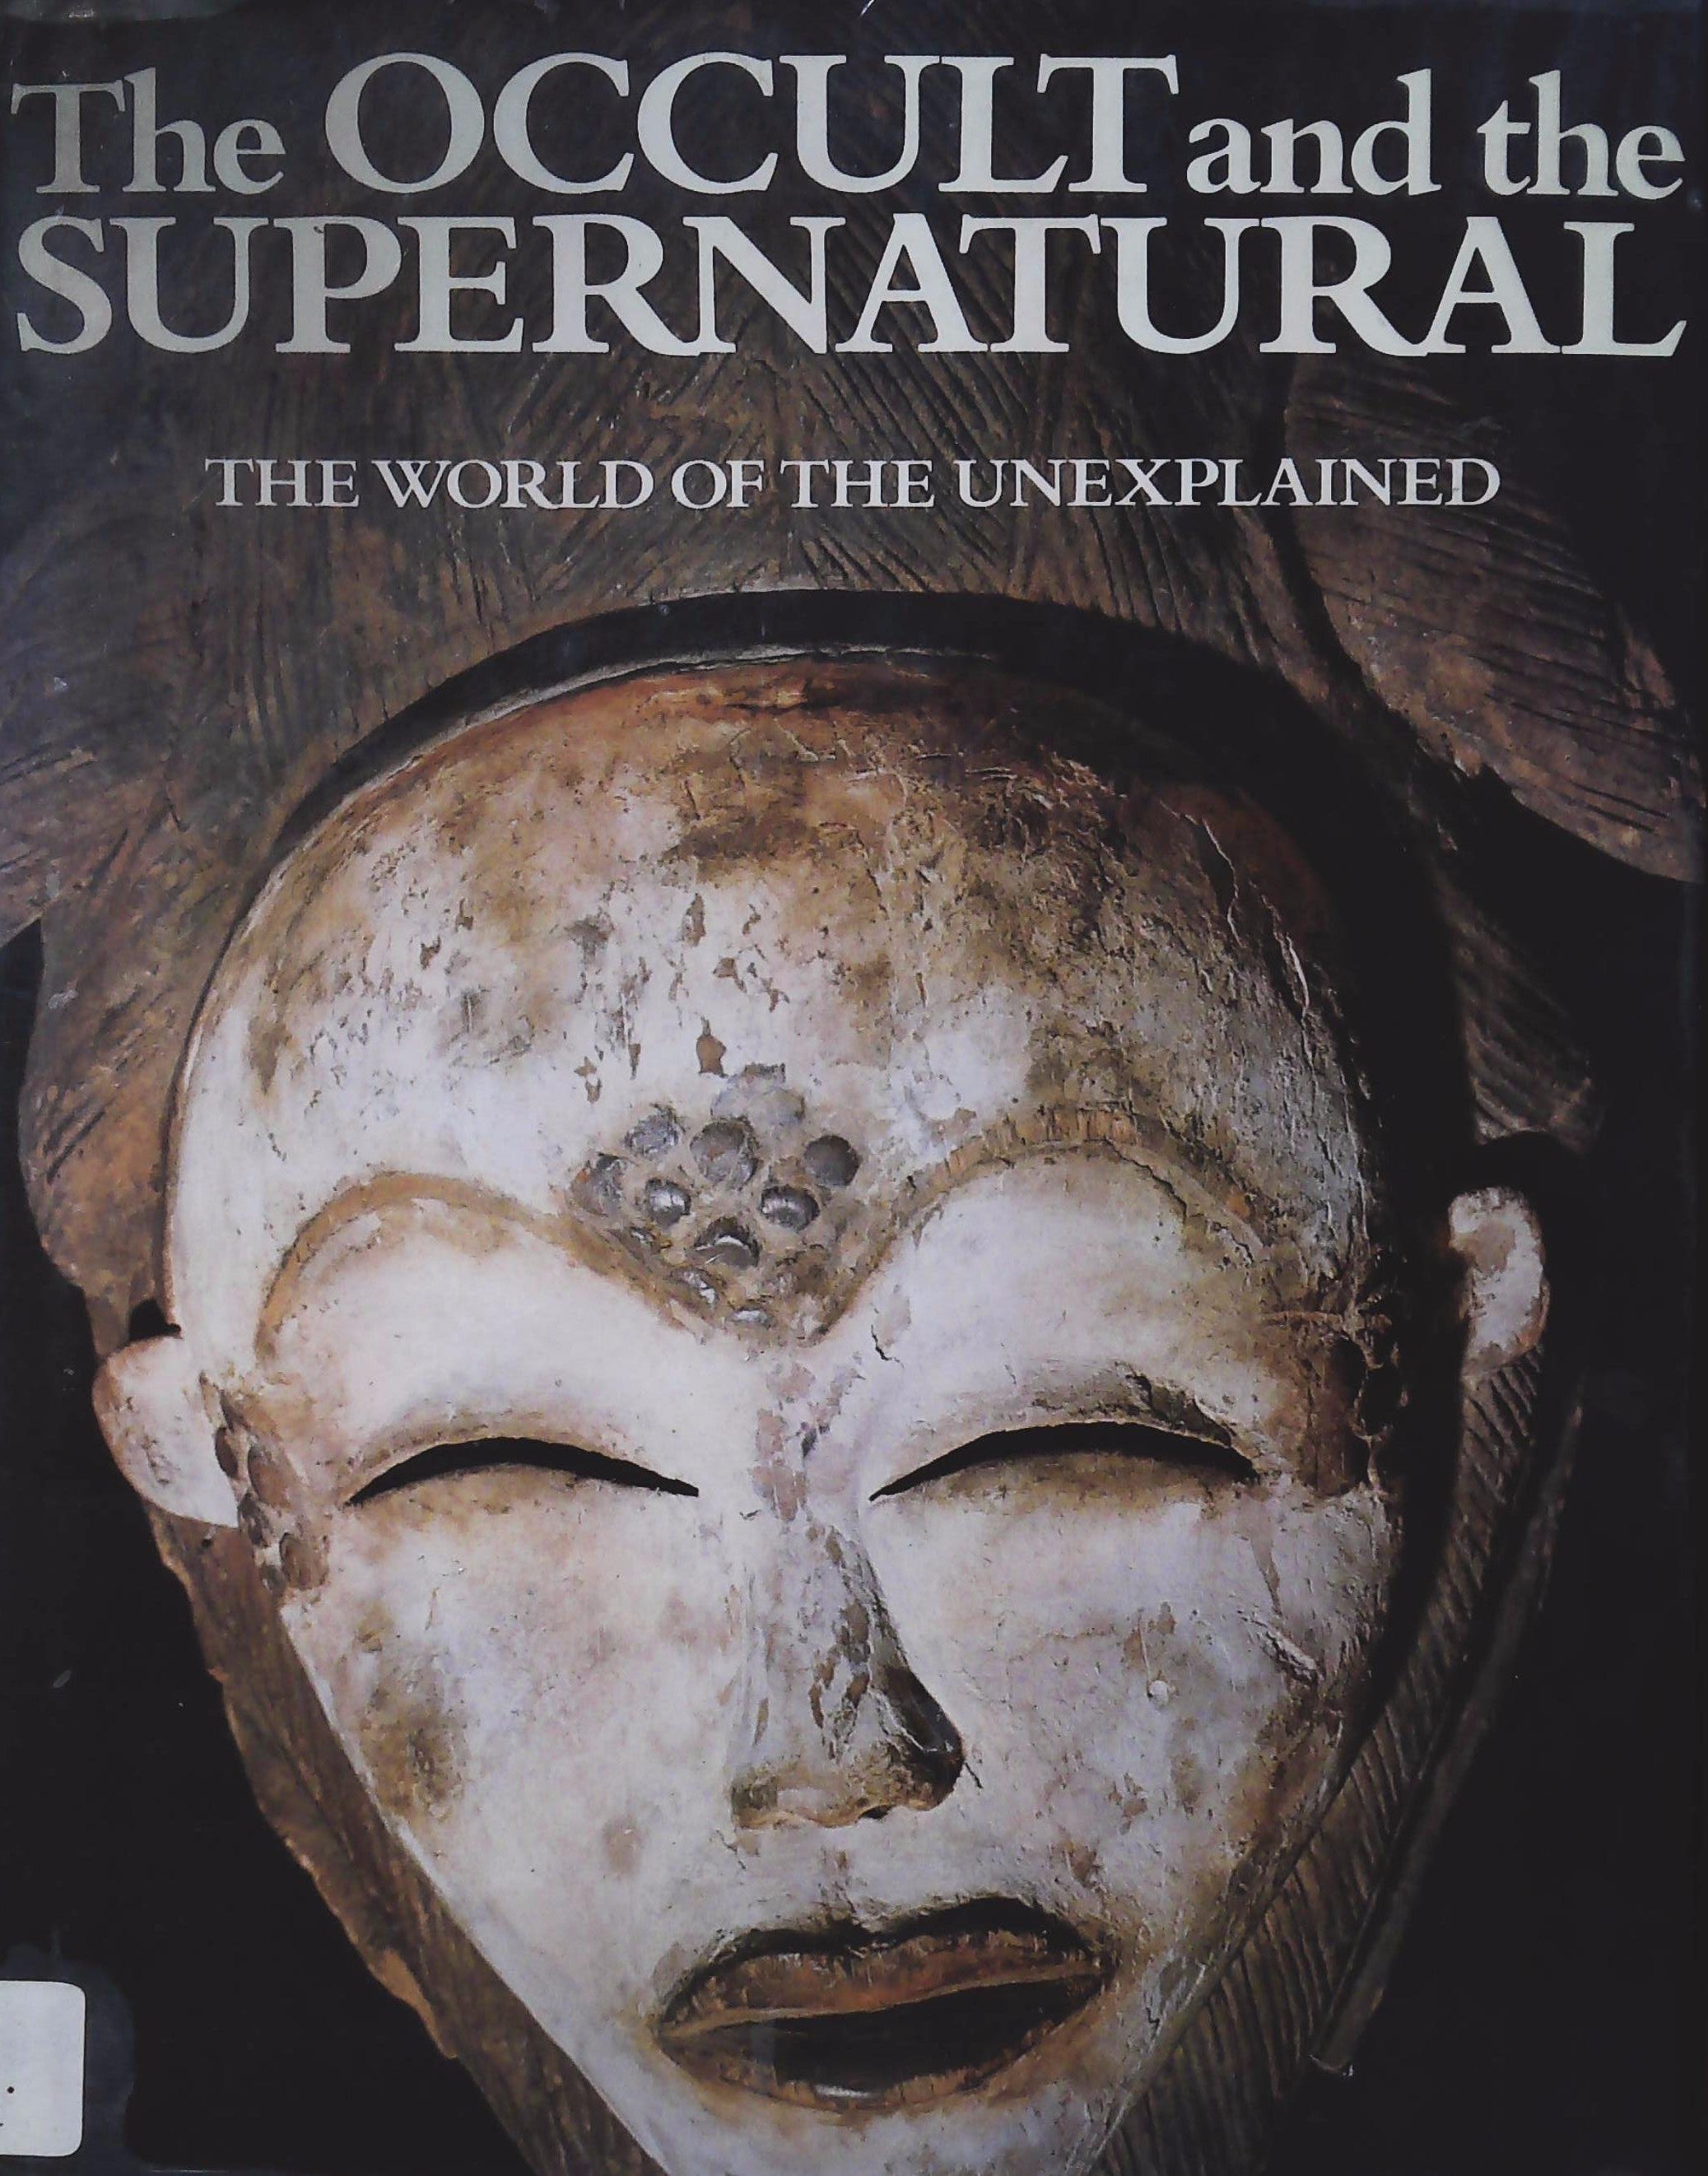 Livre ISBN 0706404319 The Occult and the supernatural : The world of the unexplained